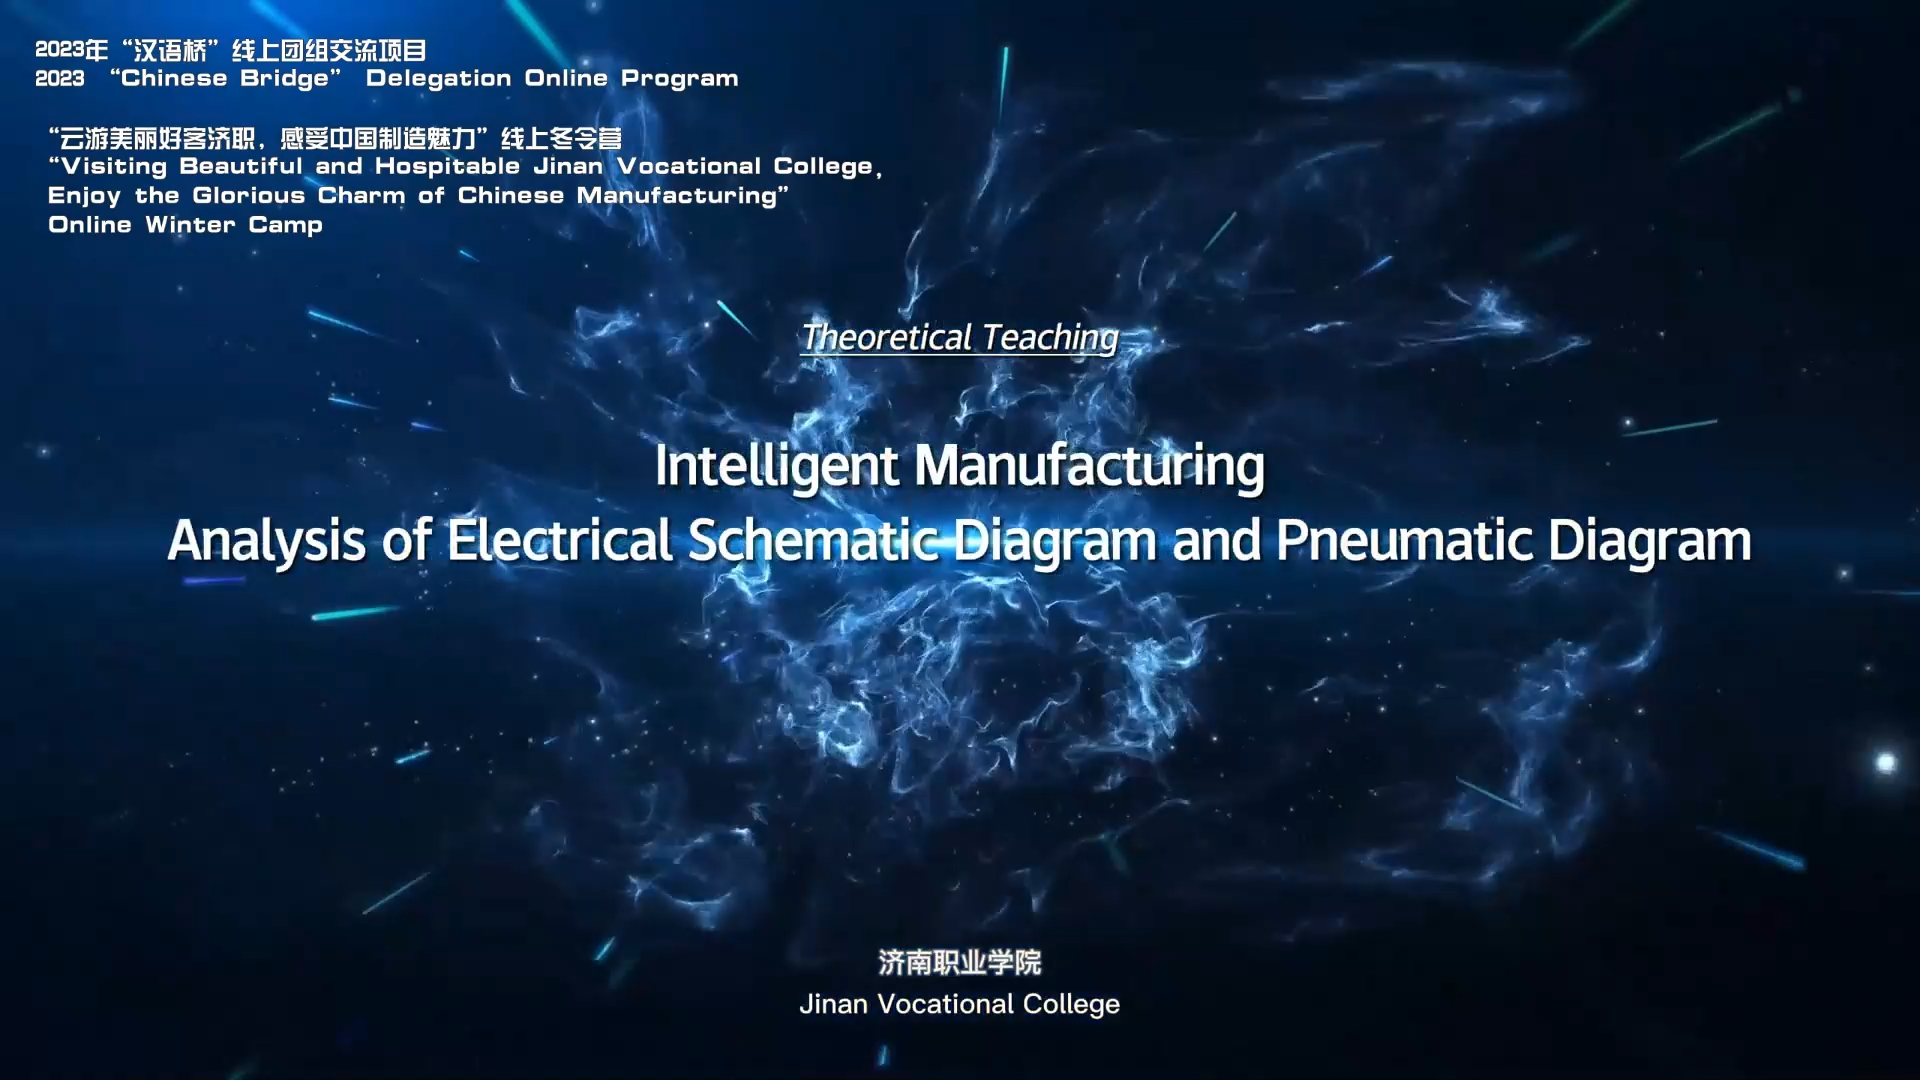 Theoretical Teaching -Intelligent Manufacturing-Analysis of Electrical Schematic Diagram and Pneumatic Diagram